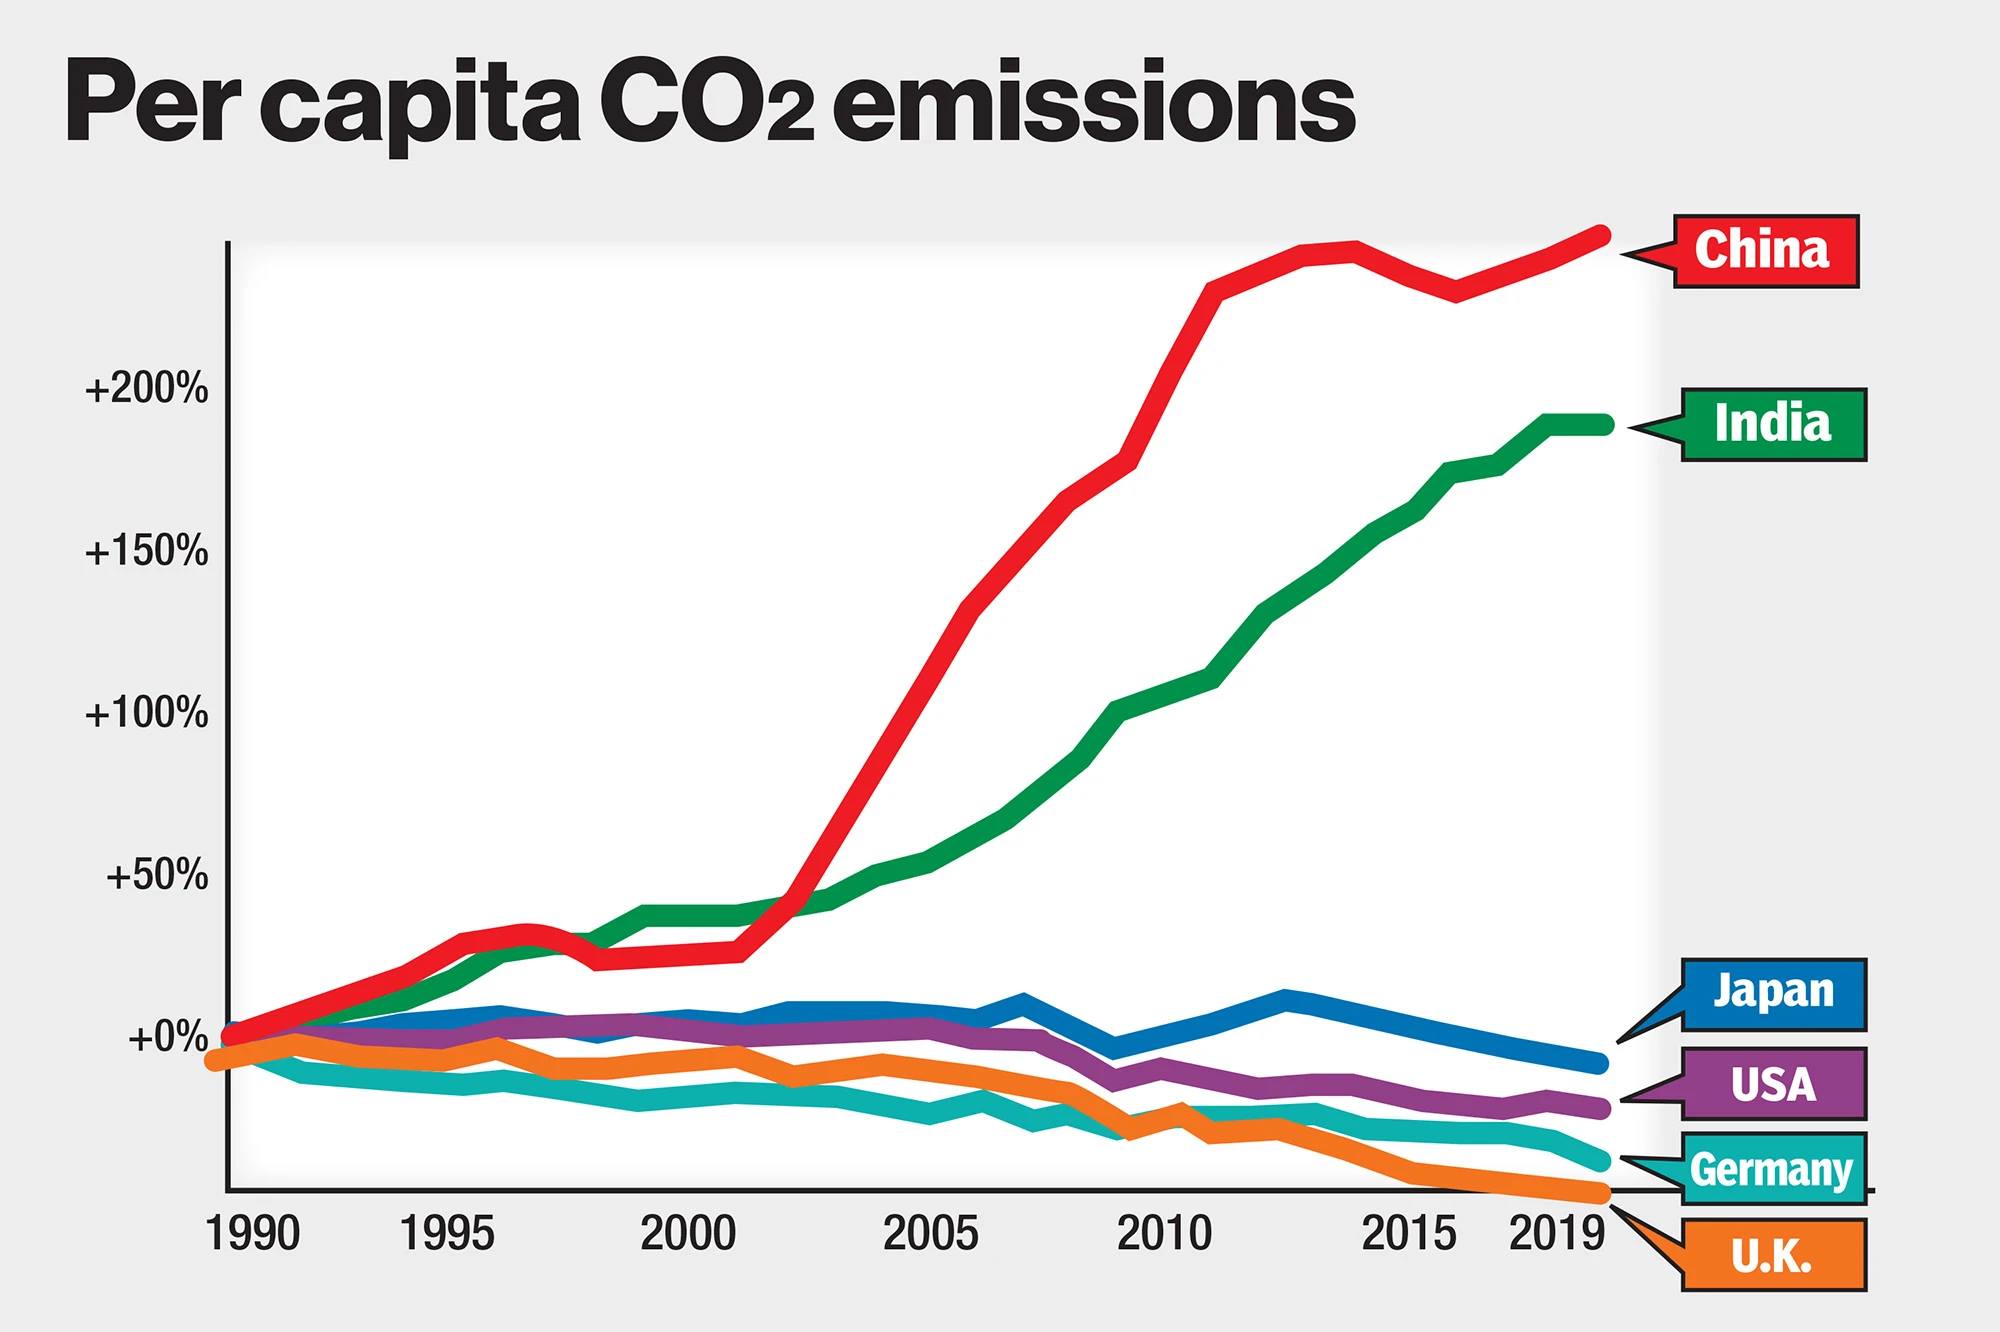 A chart showing the relative change of per capita CO2 emissions from 1990 to 2019 for China, India, US, UK, Germany, and Japan